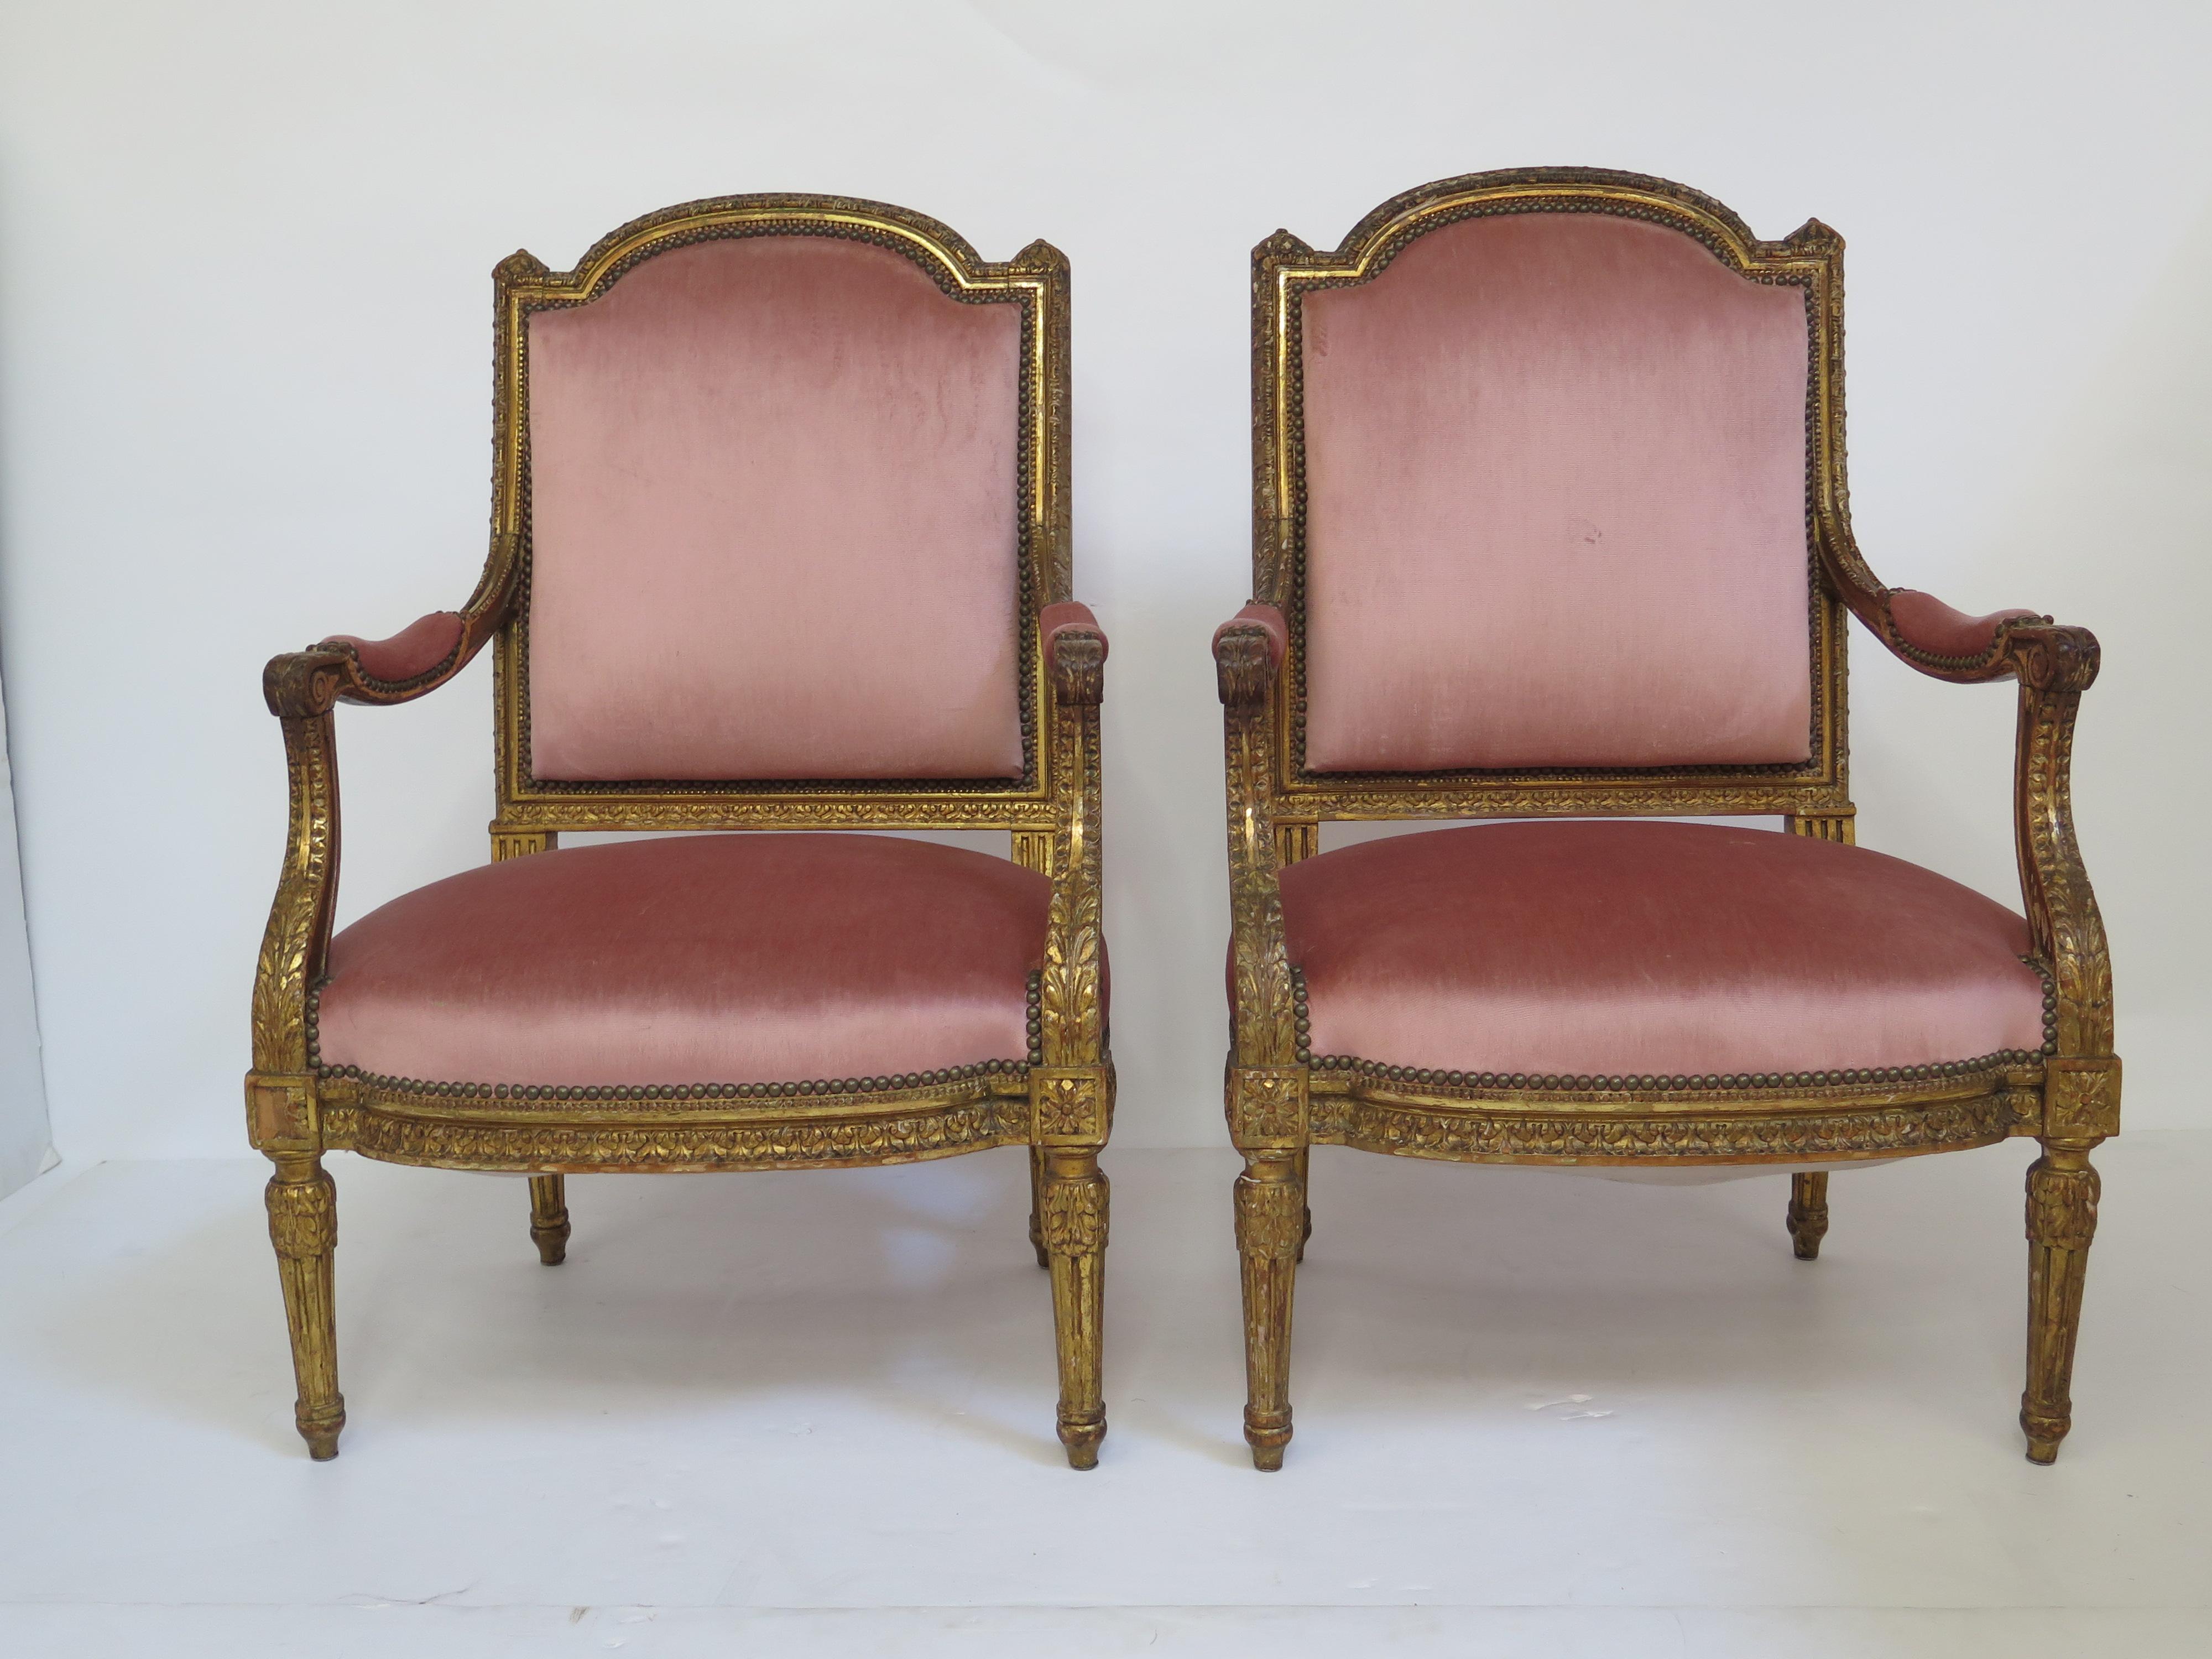 A pair of Louis XVI style armchairs with heavily carved gilt wood frames. Upholstered seat and back in peach velvet.

Measures: 25